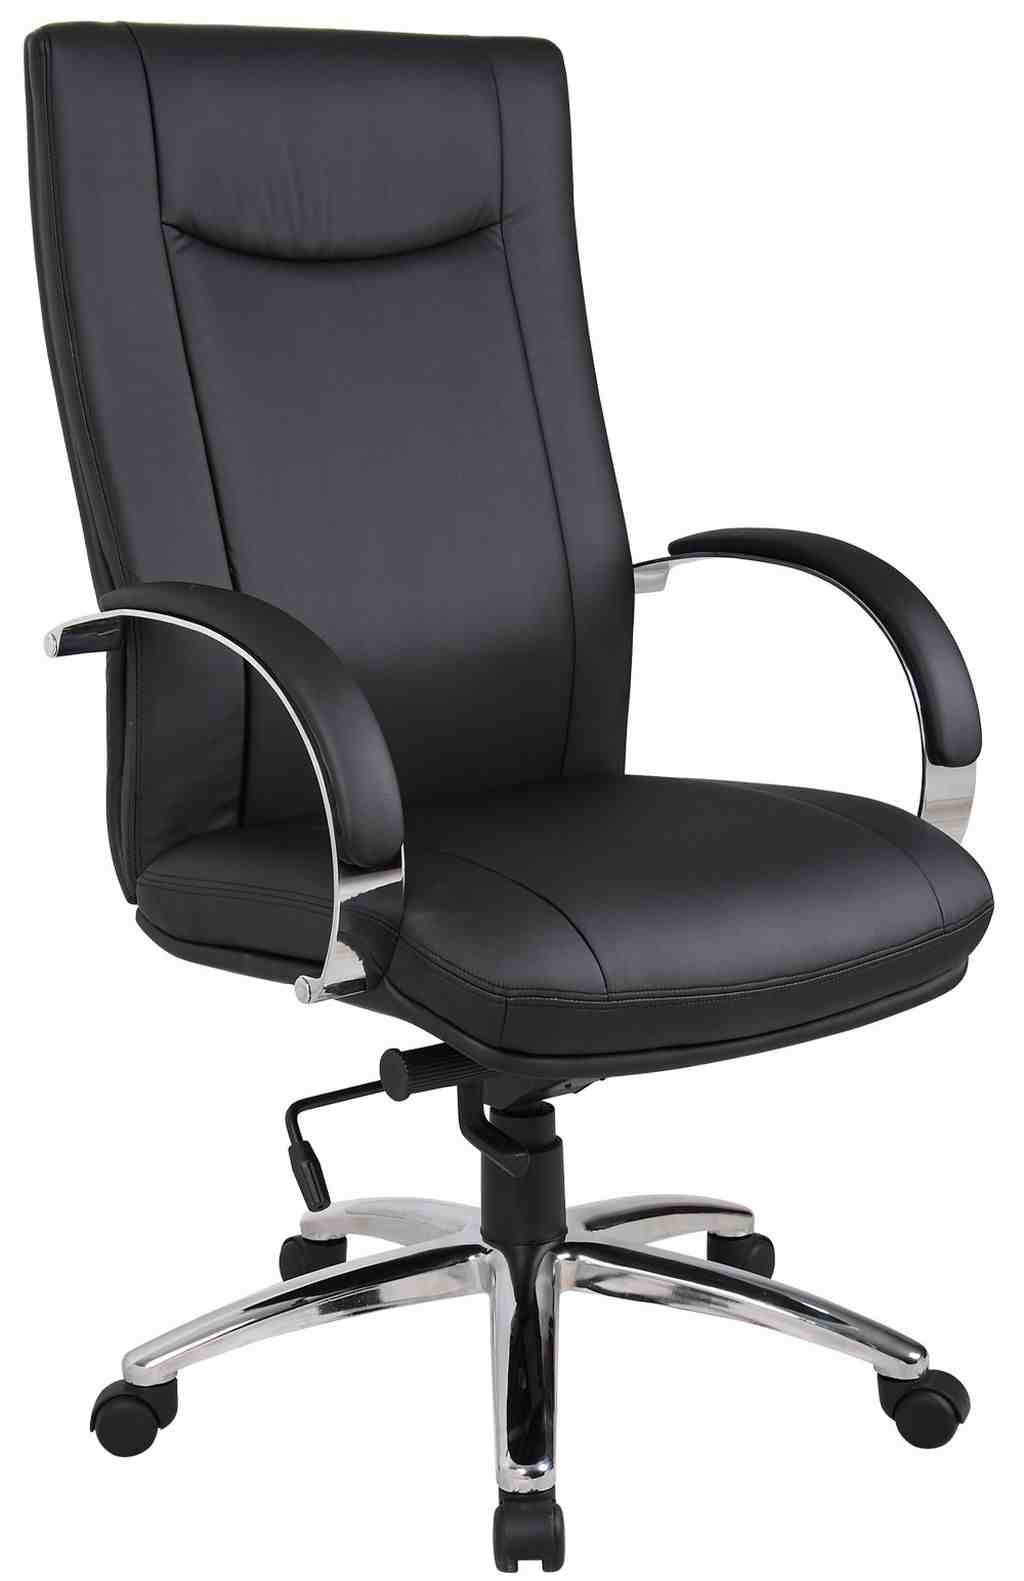 genuine leather office chair genuine leather office chair